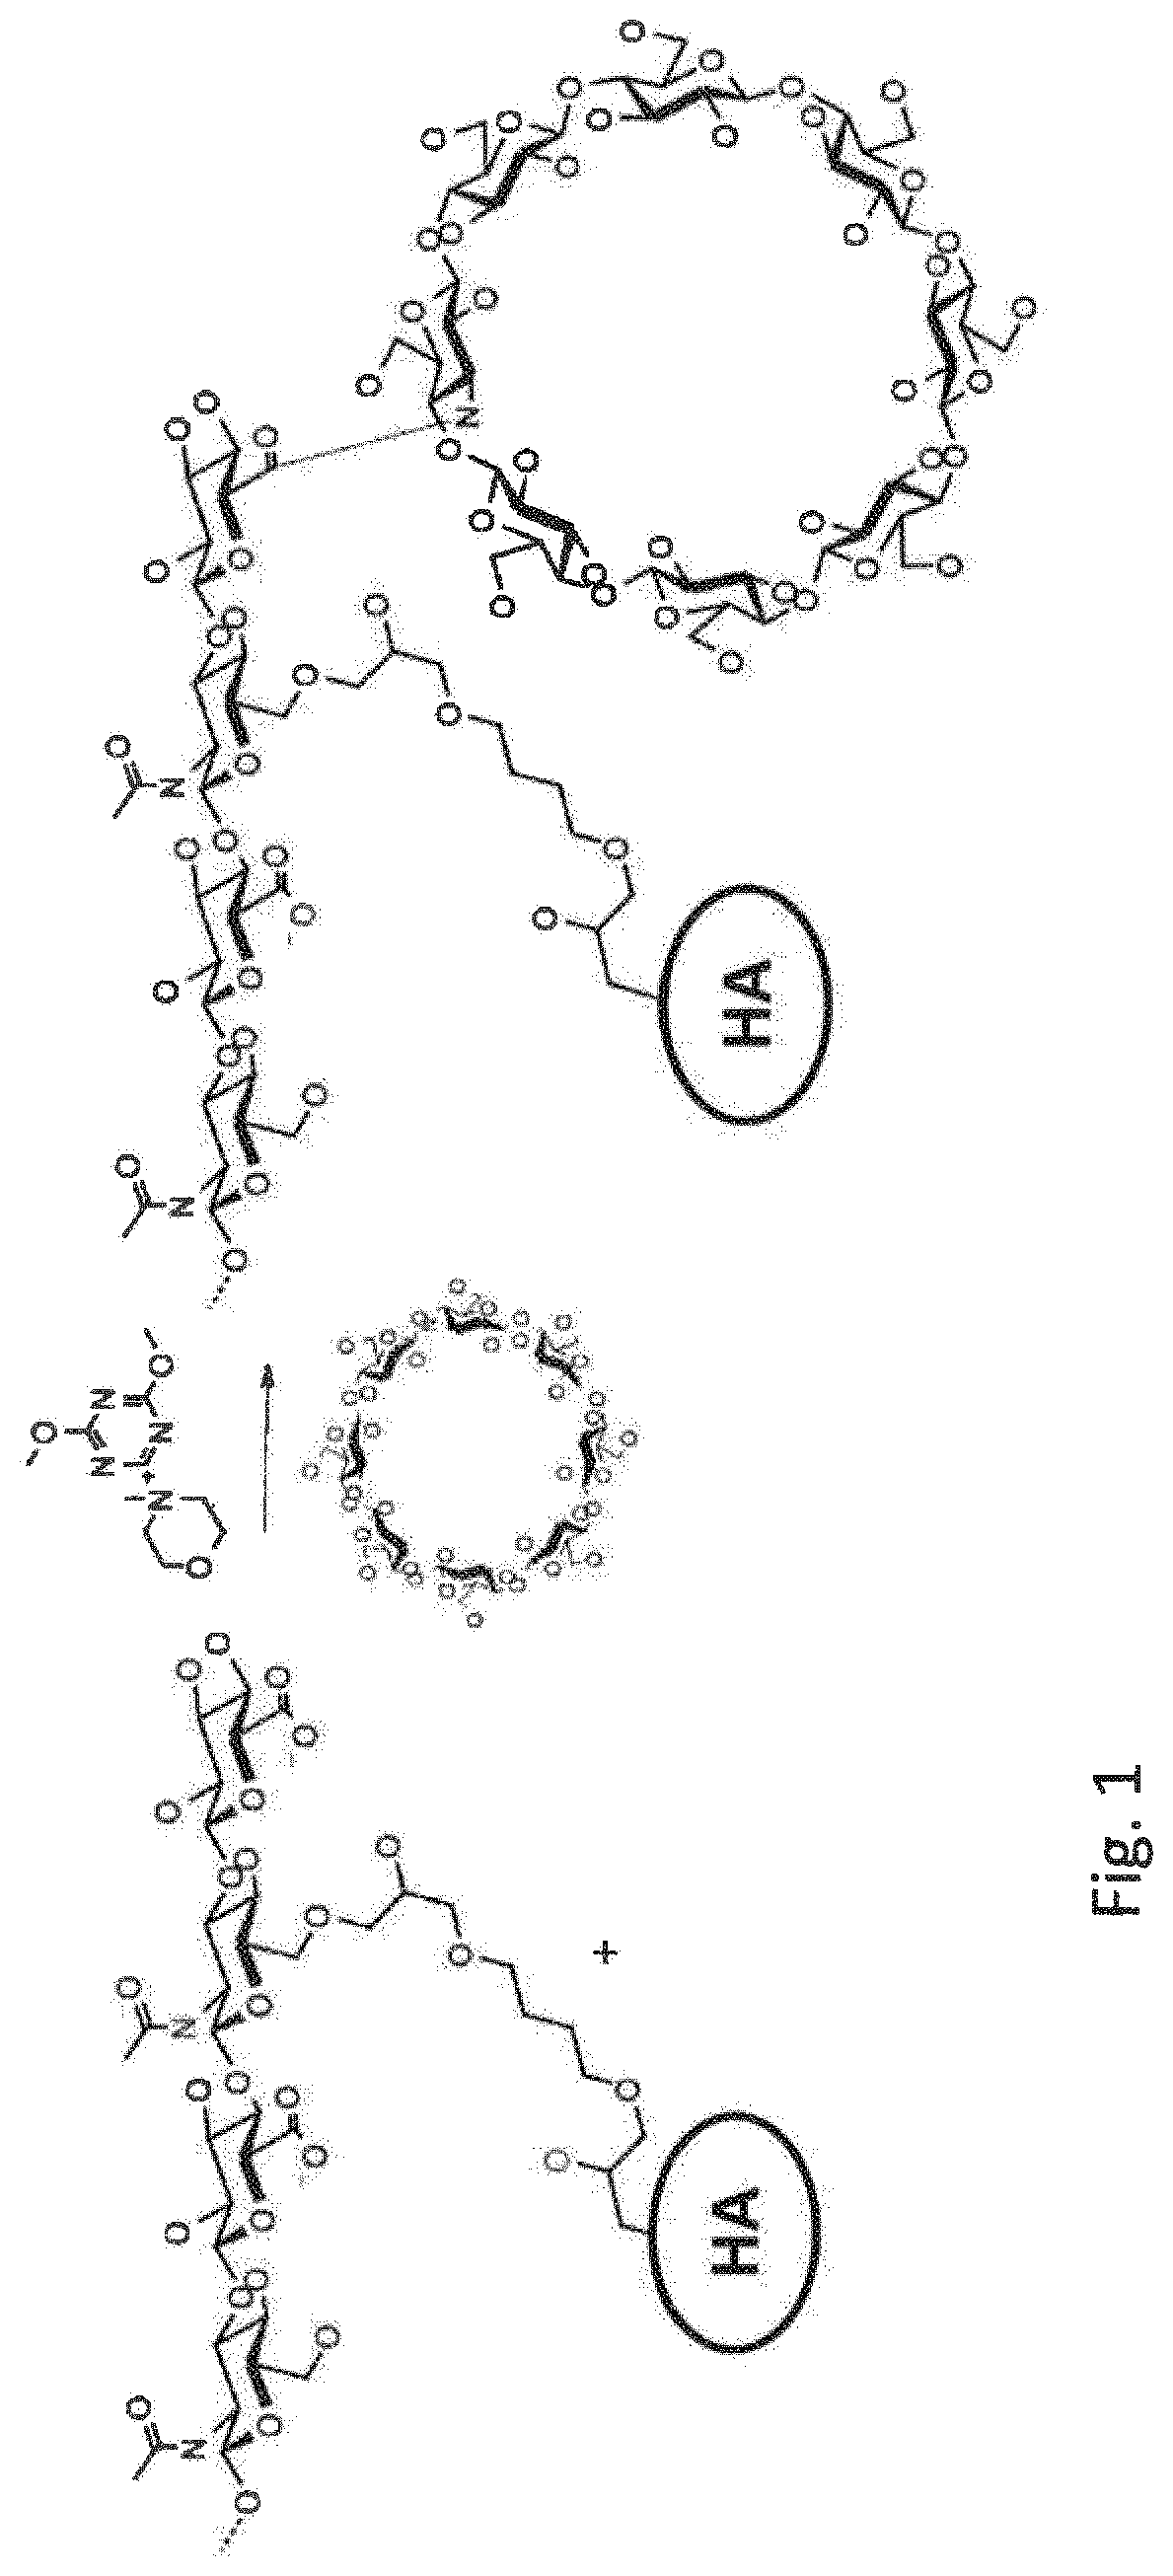 Cyclodextrin-grafted cross-linked hyaluronic acid complexed with active drug substances and uses thereof